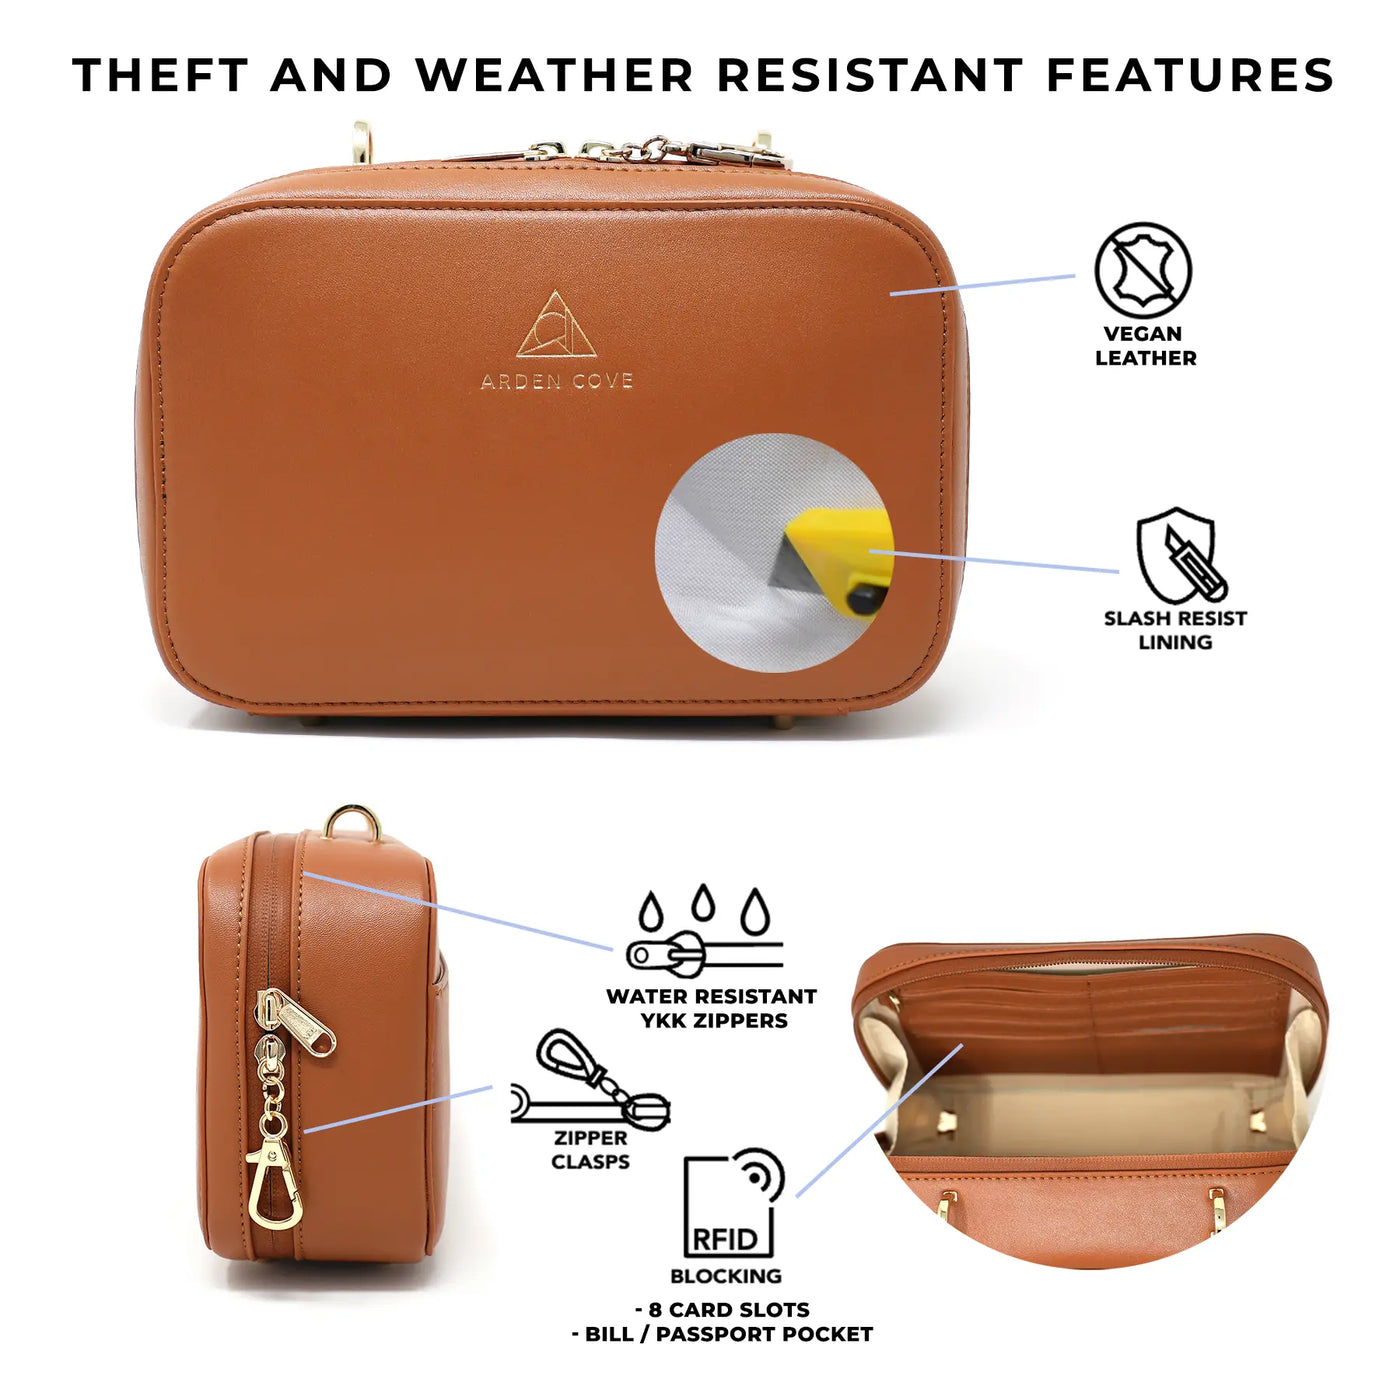 Theft and weather resistant features of Elise Crossbody